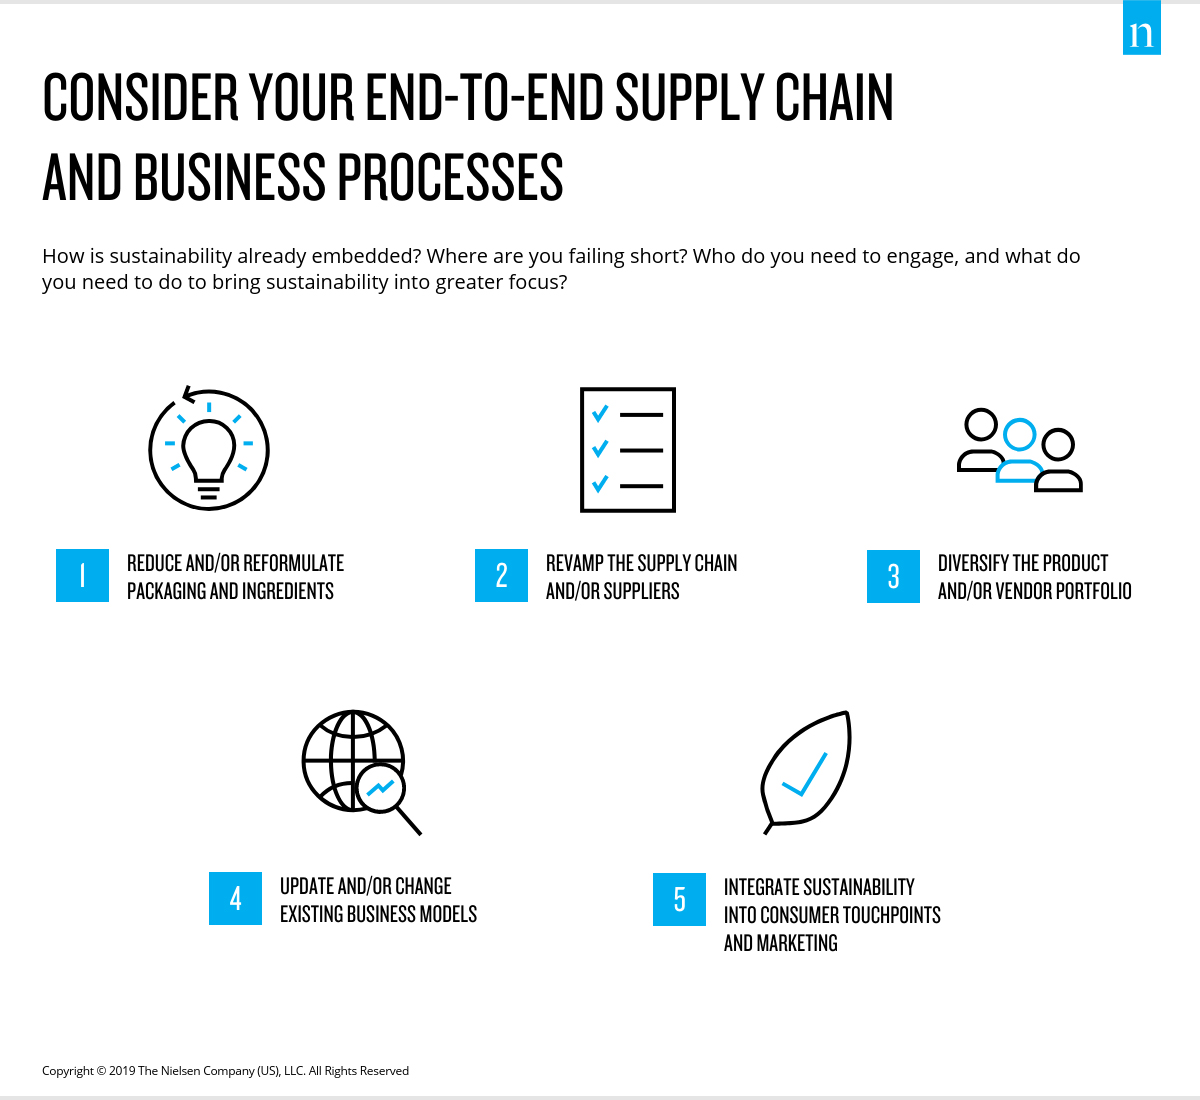 Consider your end-to-end supply chain and business processes